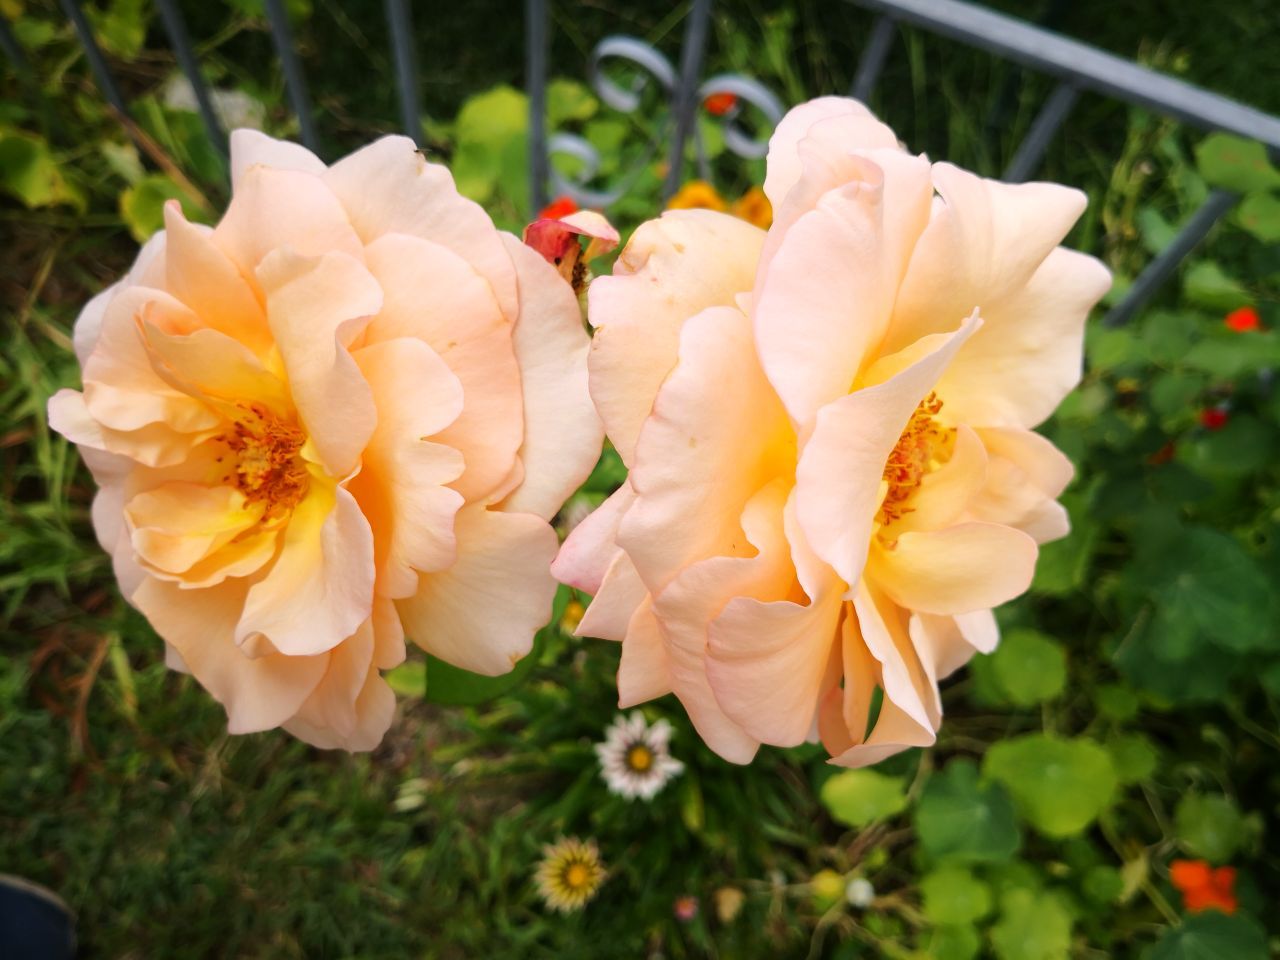 Photo Gallery Image of Rose (Apricot)